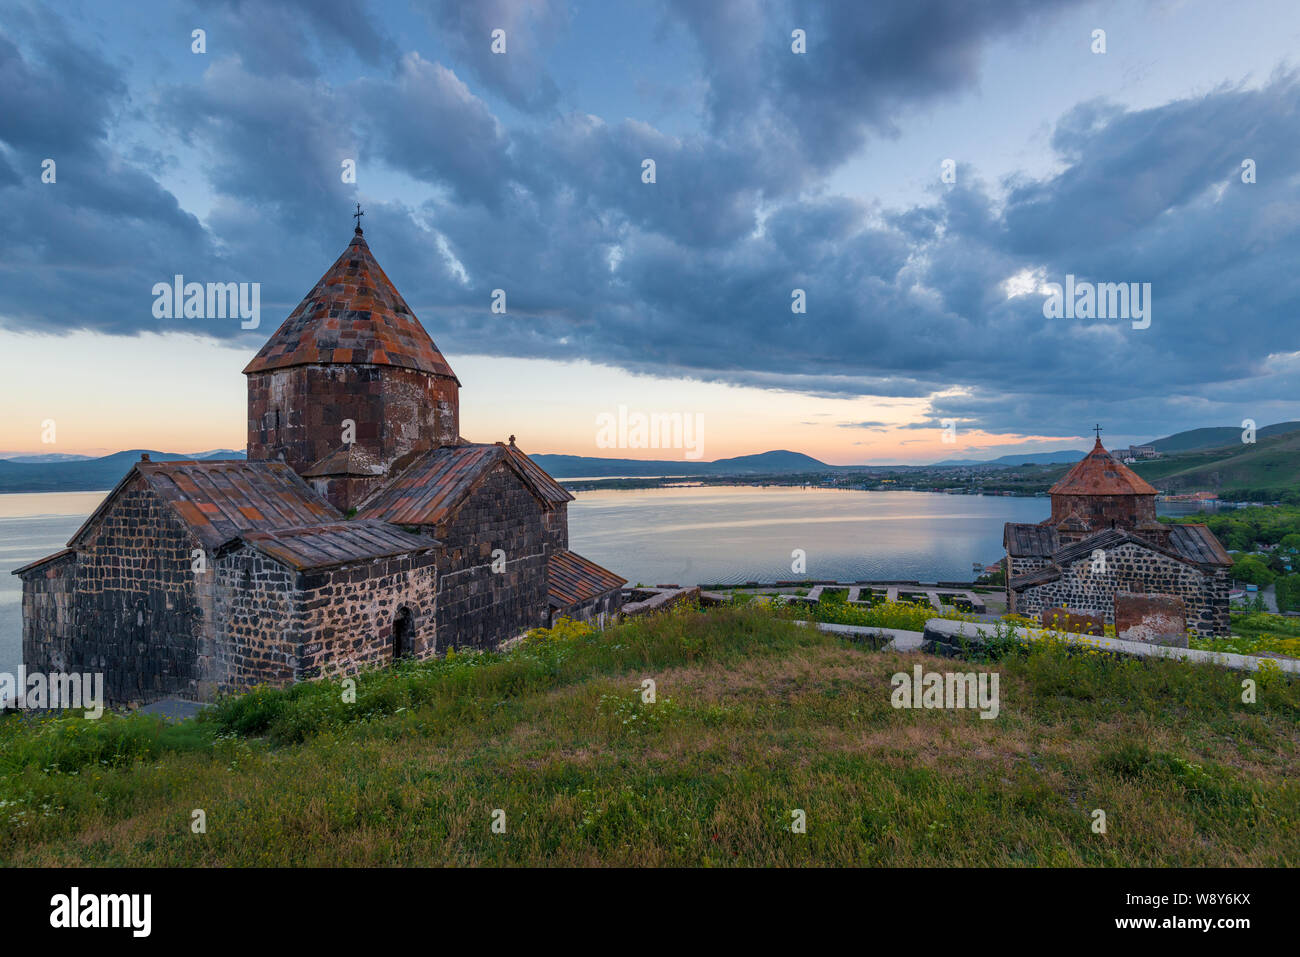 Dramatic view of the sights of Armenia - Lake Sevan and the monastery of Sevanavank at sunset Stock Photo